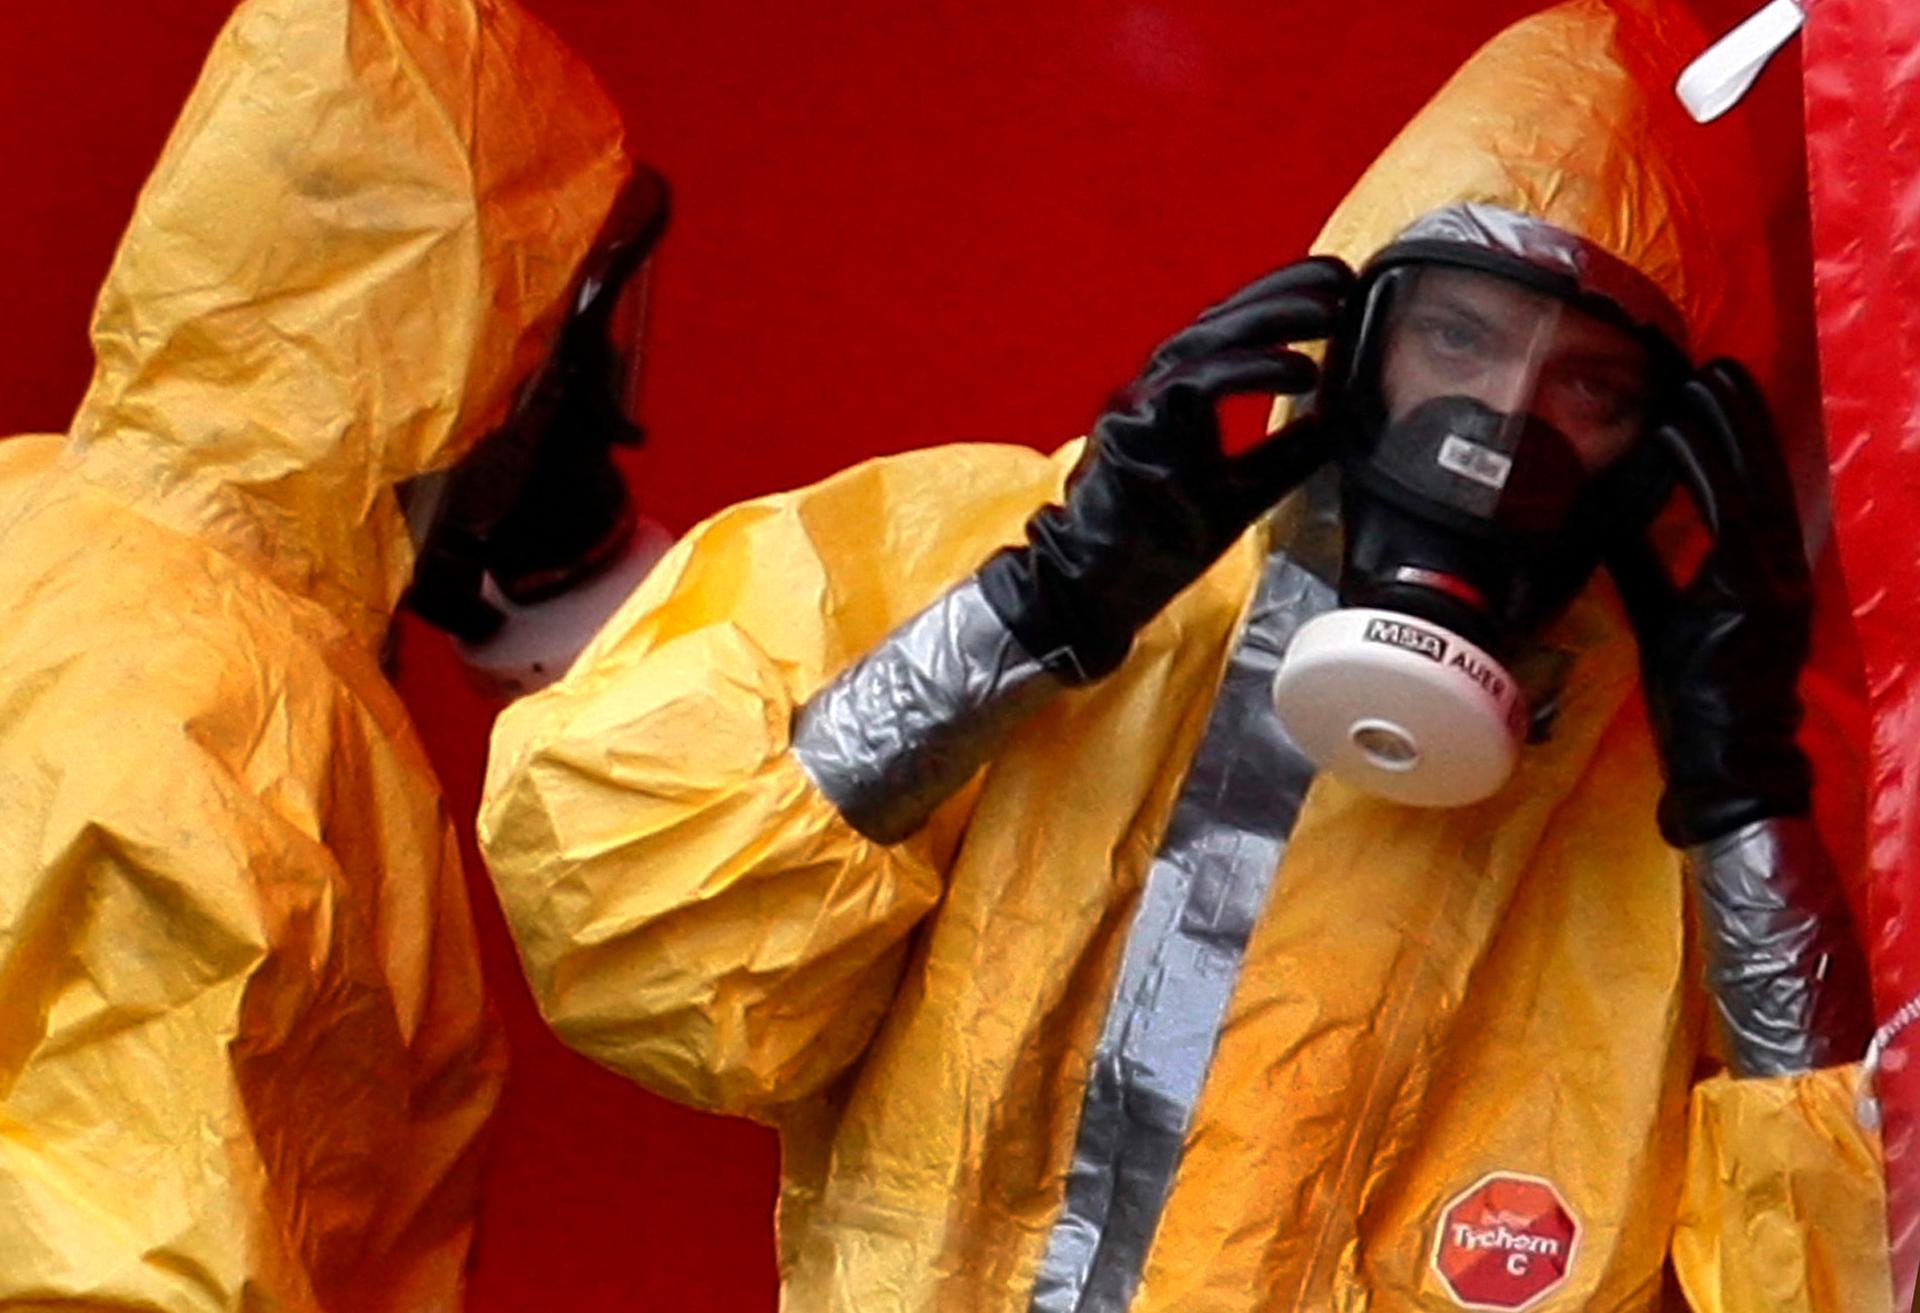 Workers in biohazard suits stand at the entry of a sealed-off poultry farm in Trumling, southern Germany, on Sep. 8, 2007. The H5N1 bird flu virus had been found in several ducks at a nearby poultry farm. 